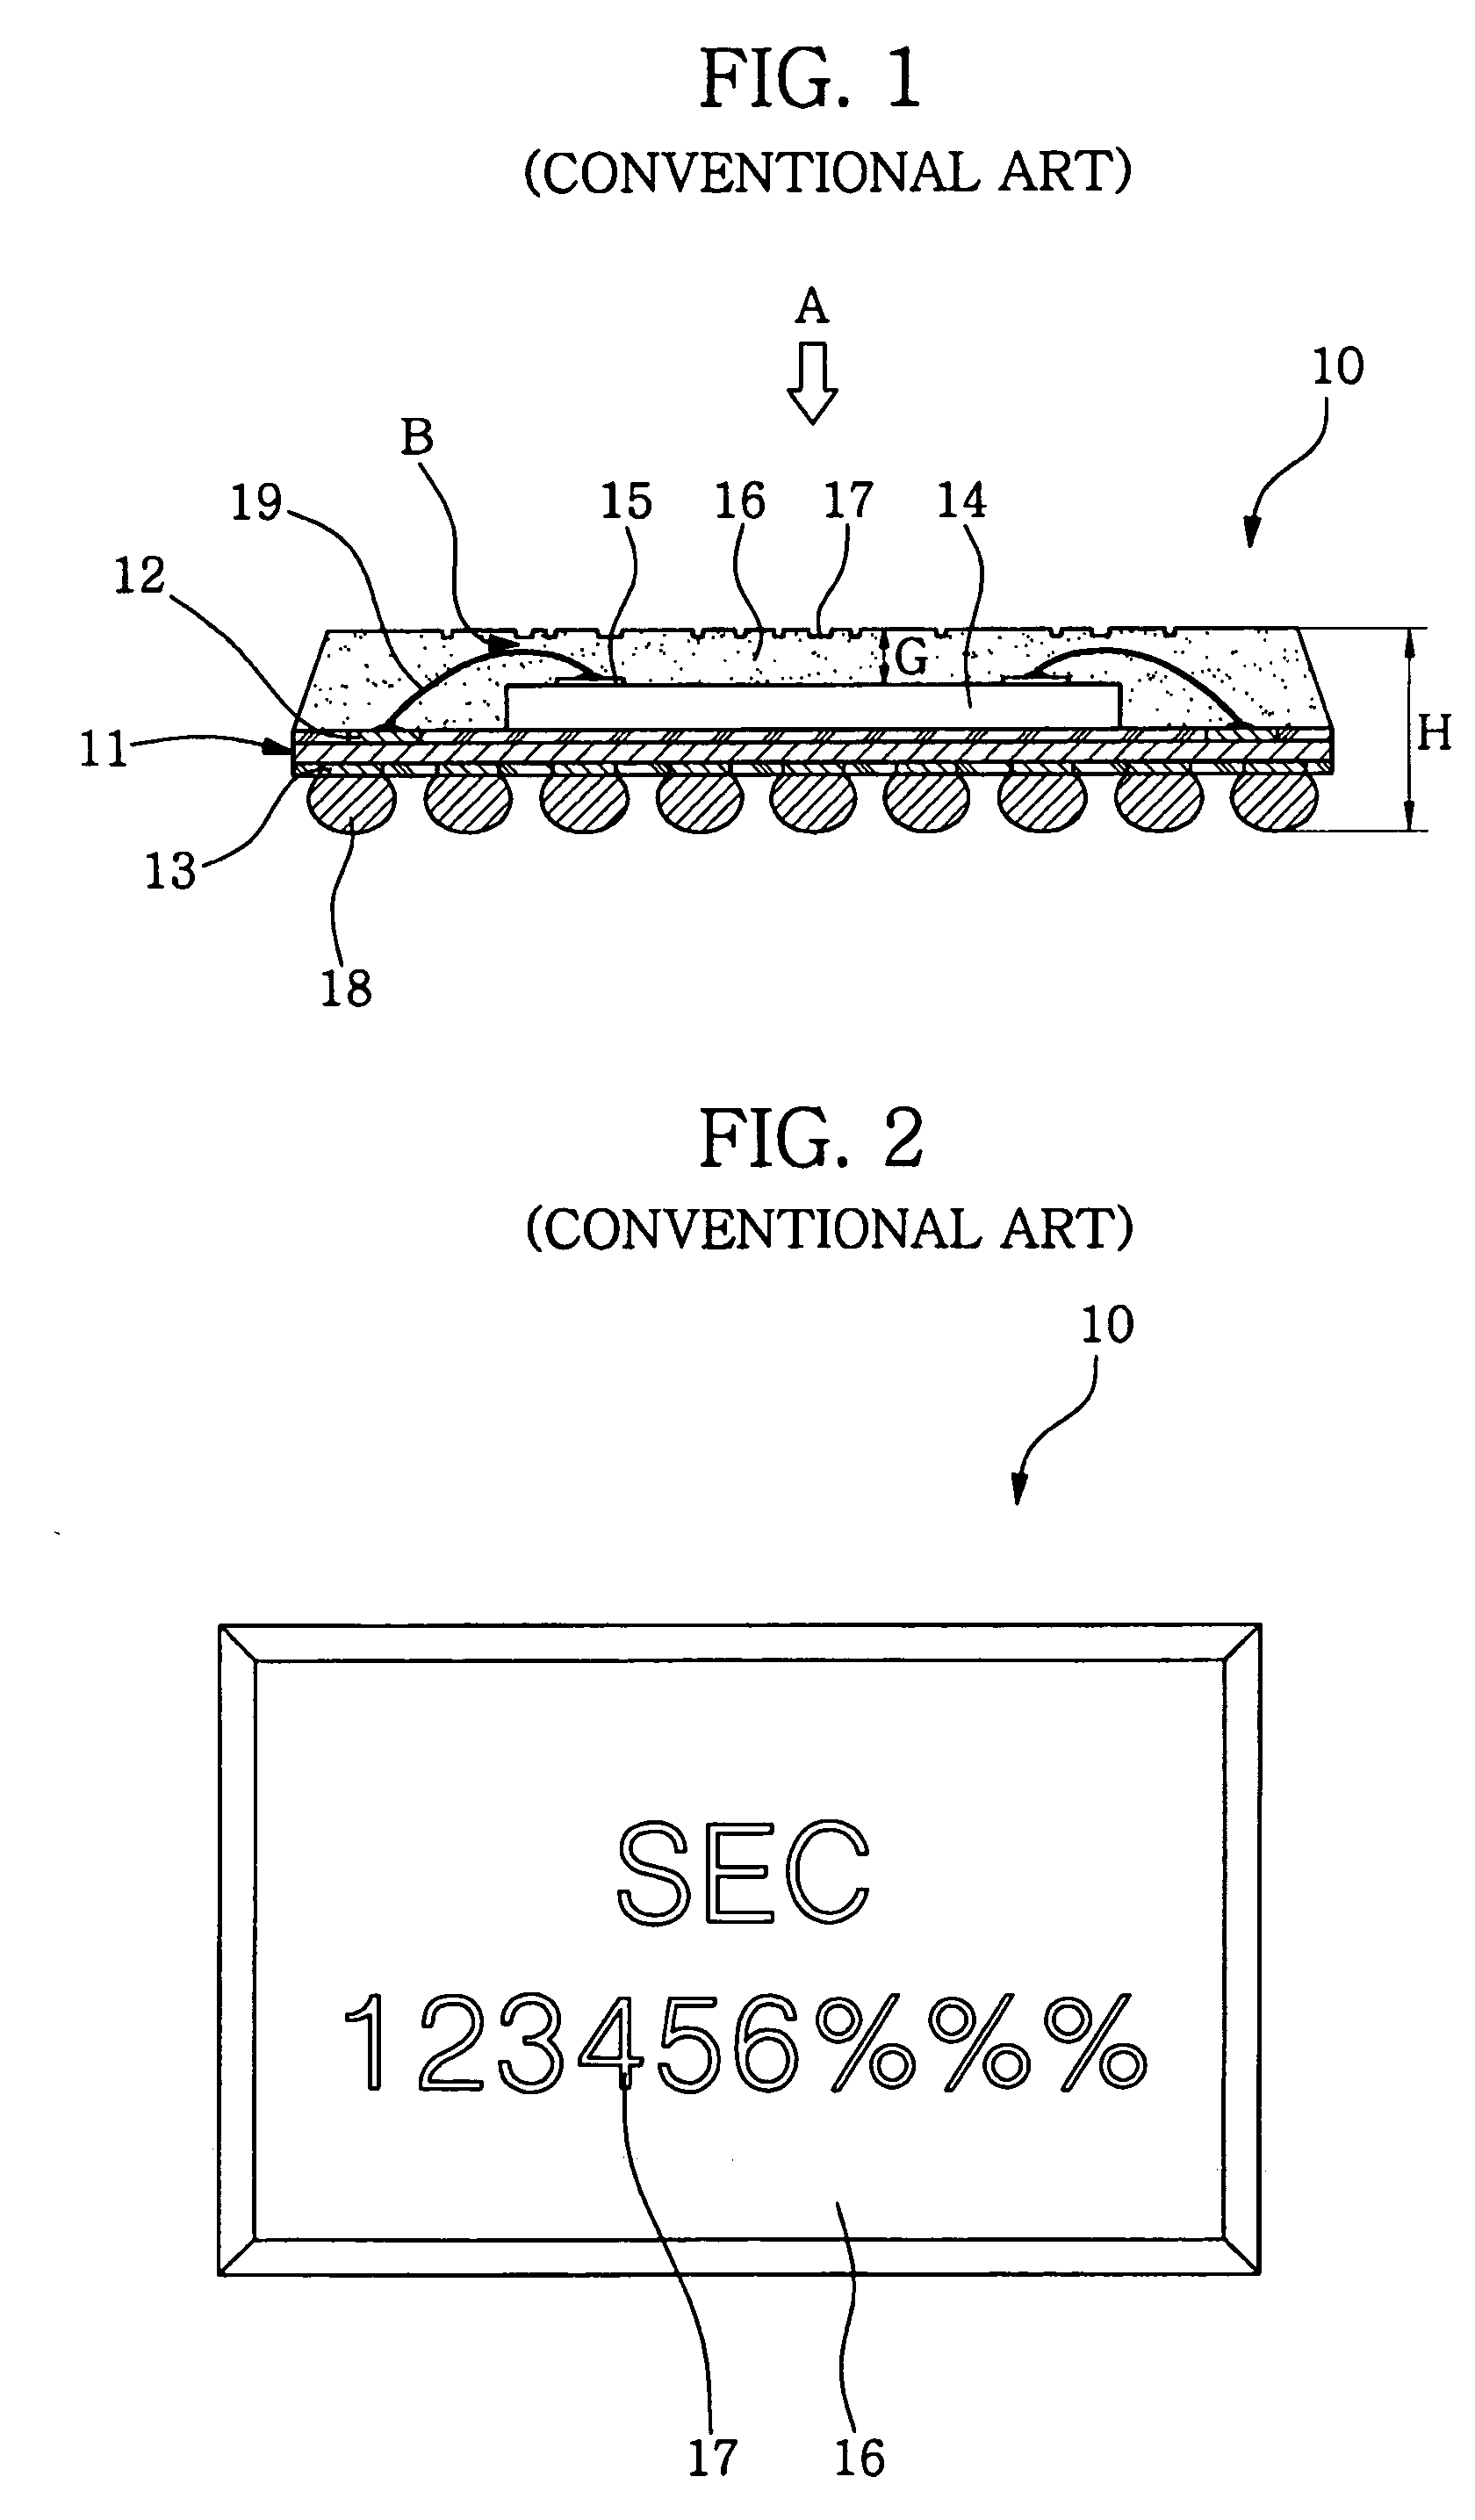 Molding apparatus, molded semiconductor package using multi-layered film, fabricating and molding method for fabricating the same